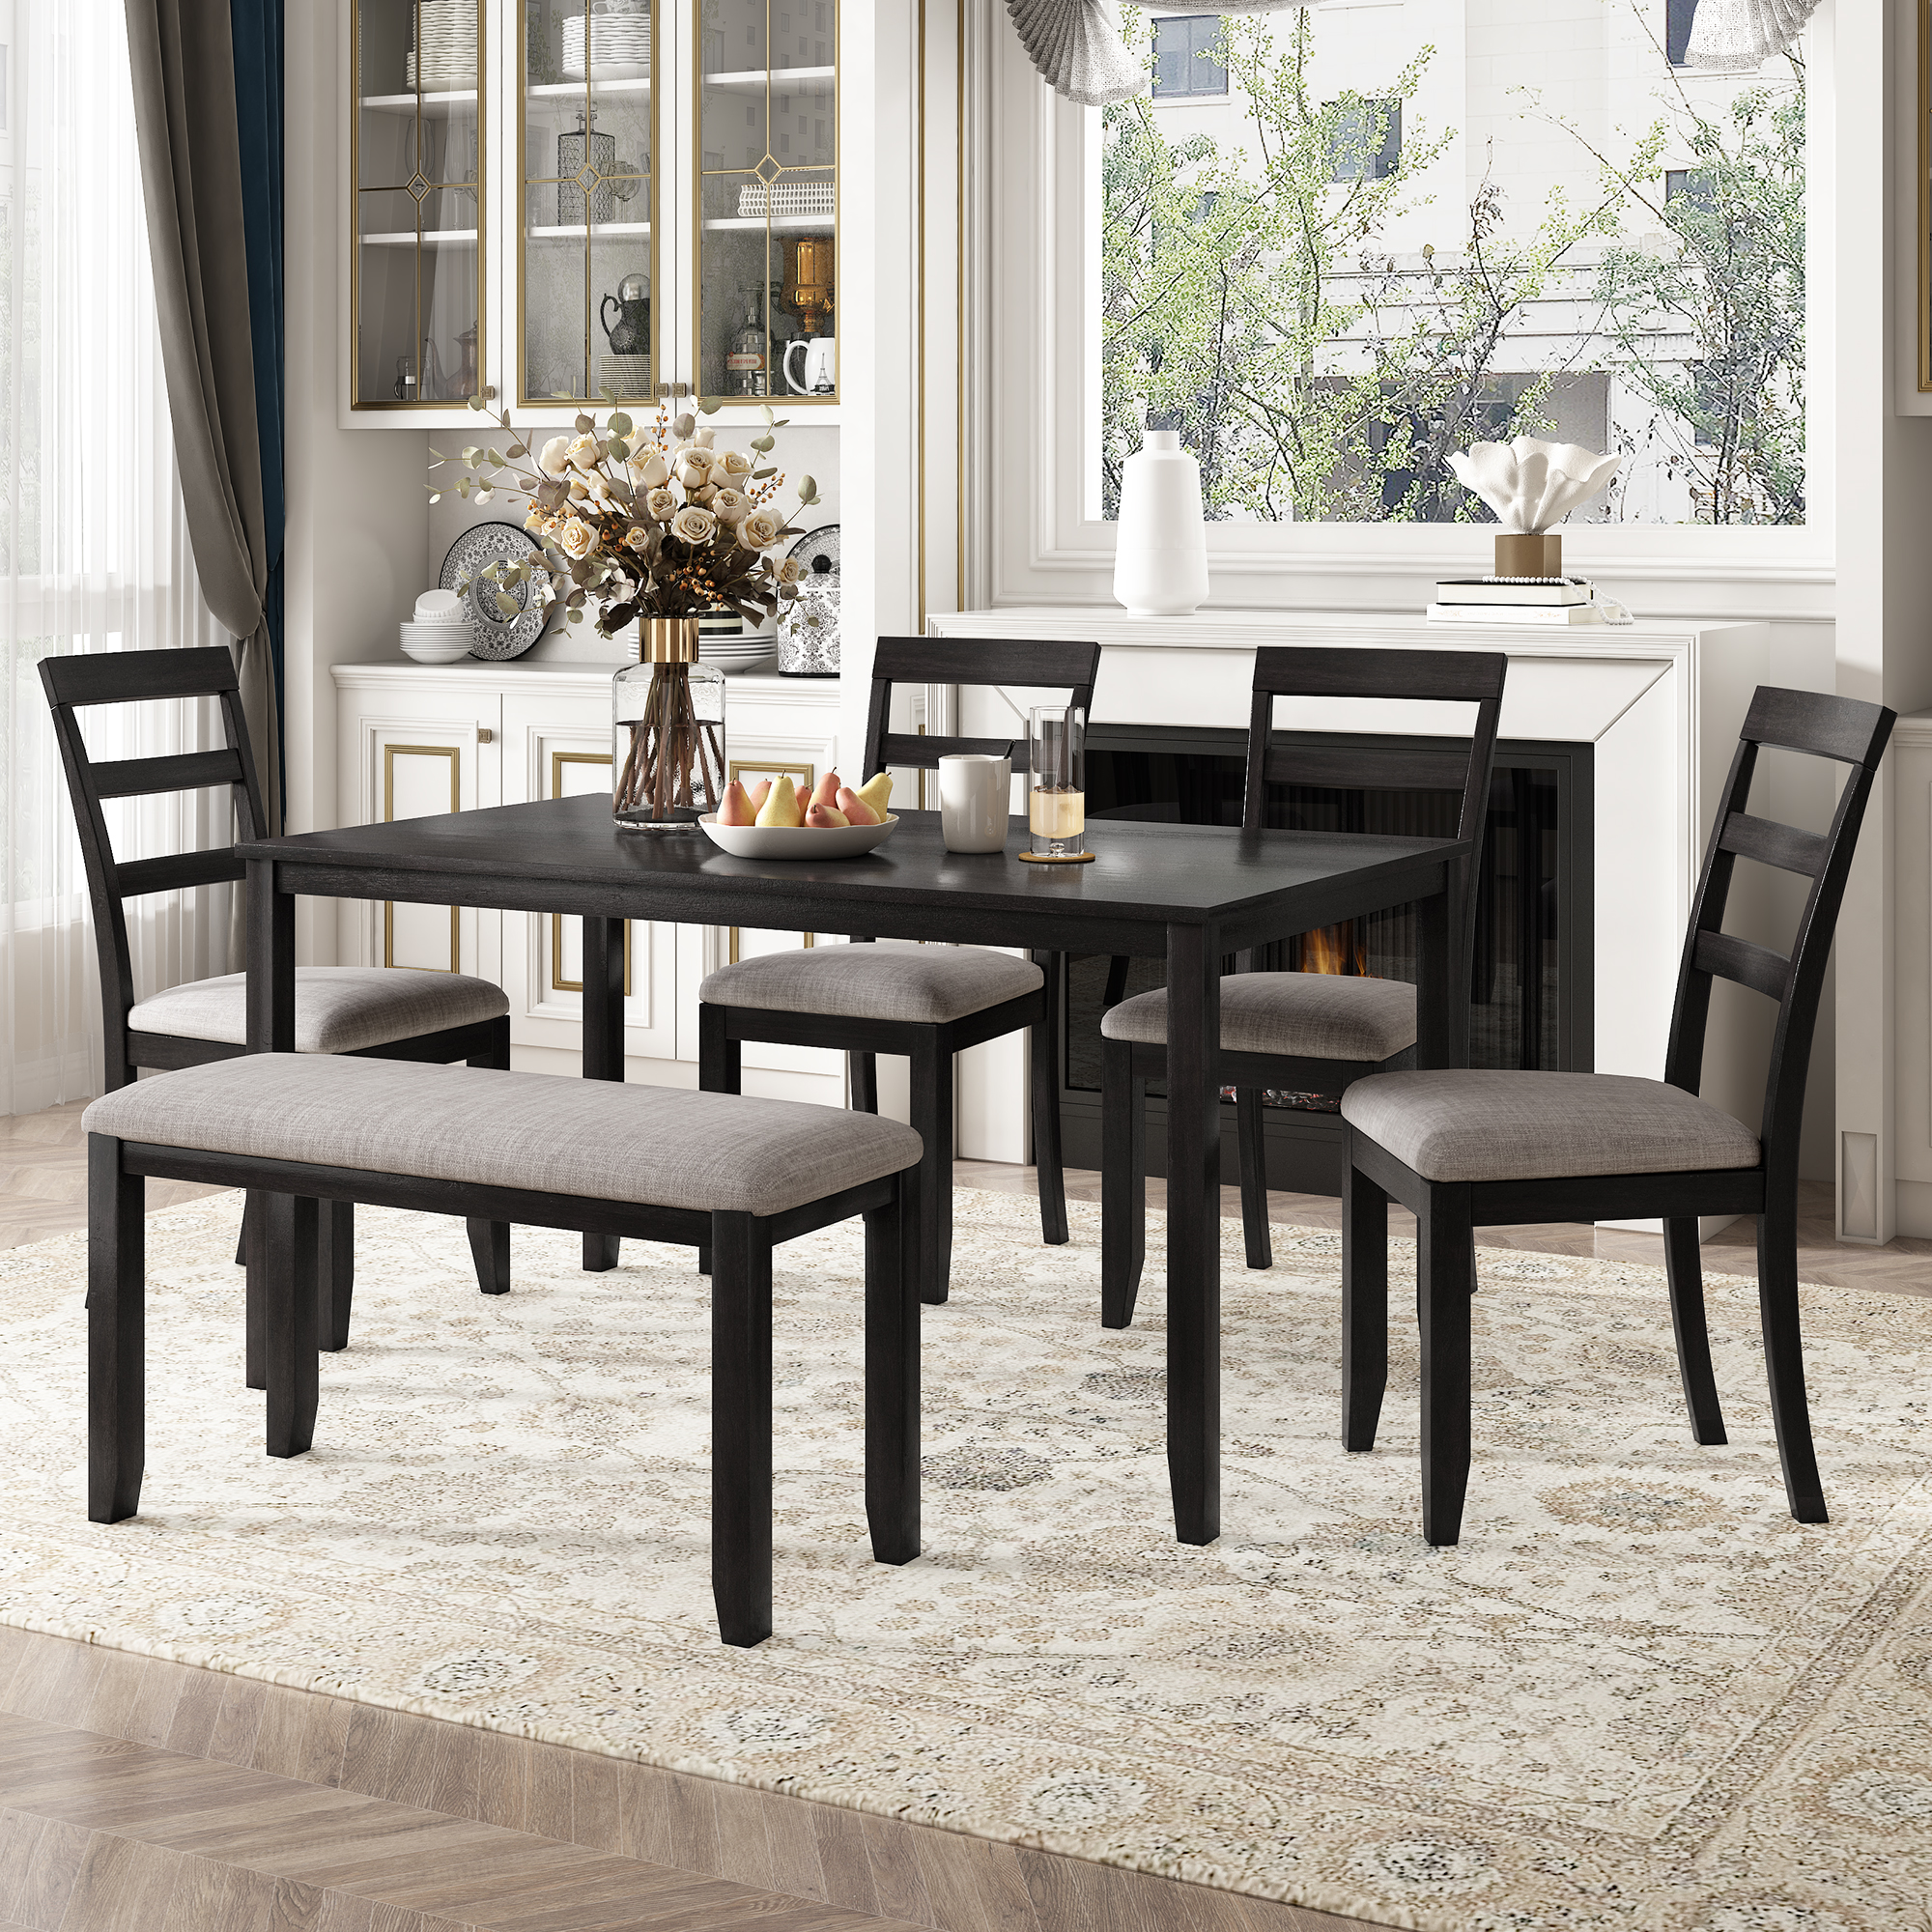 6-Piece Kitchen Wooden Dining Table, Chair and Bench - ST000016AAP